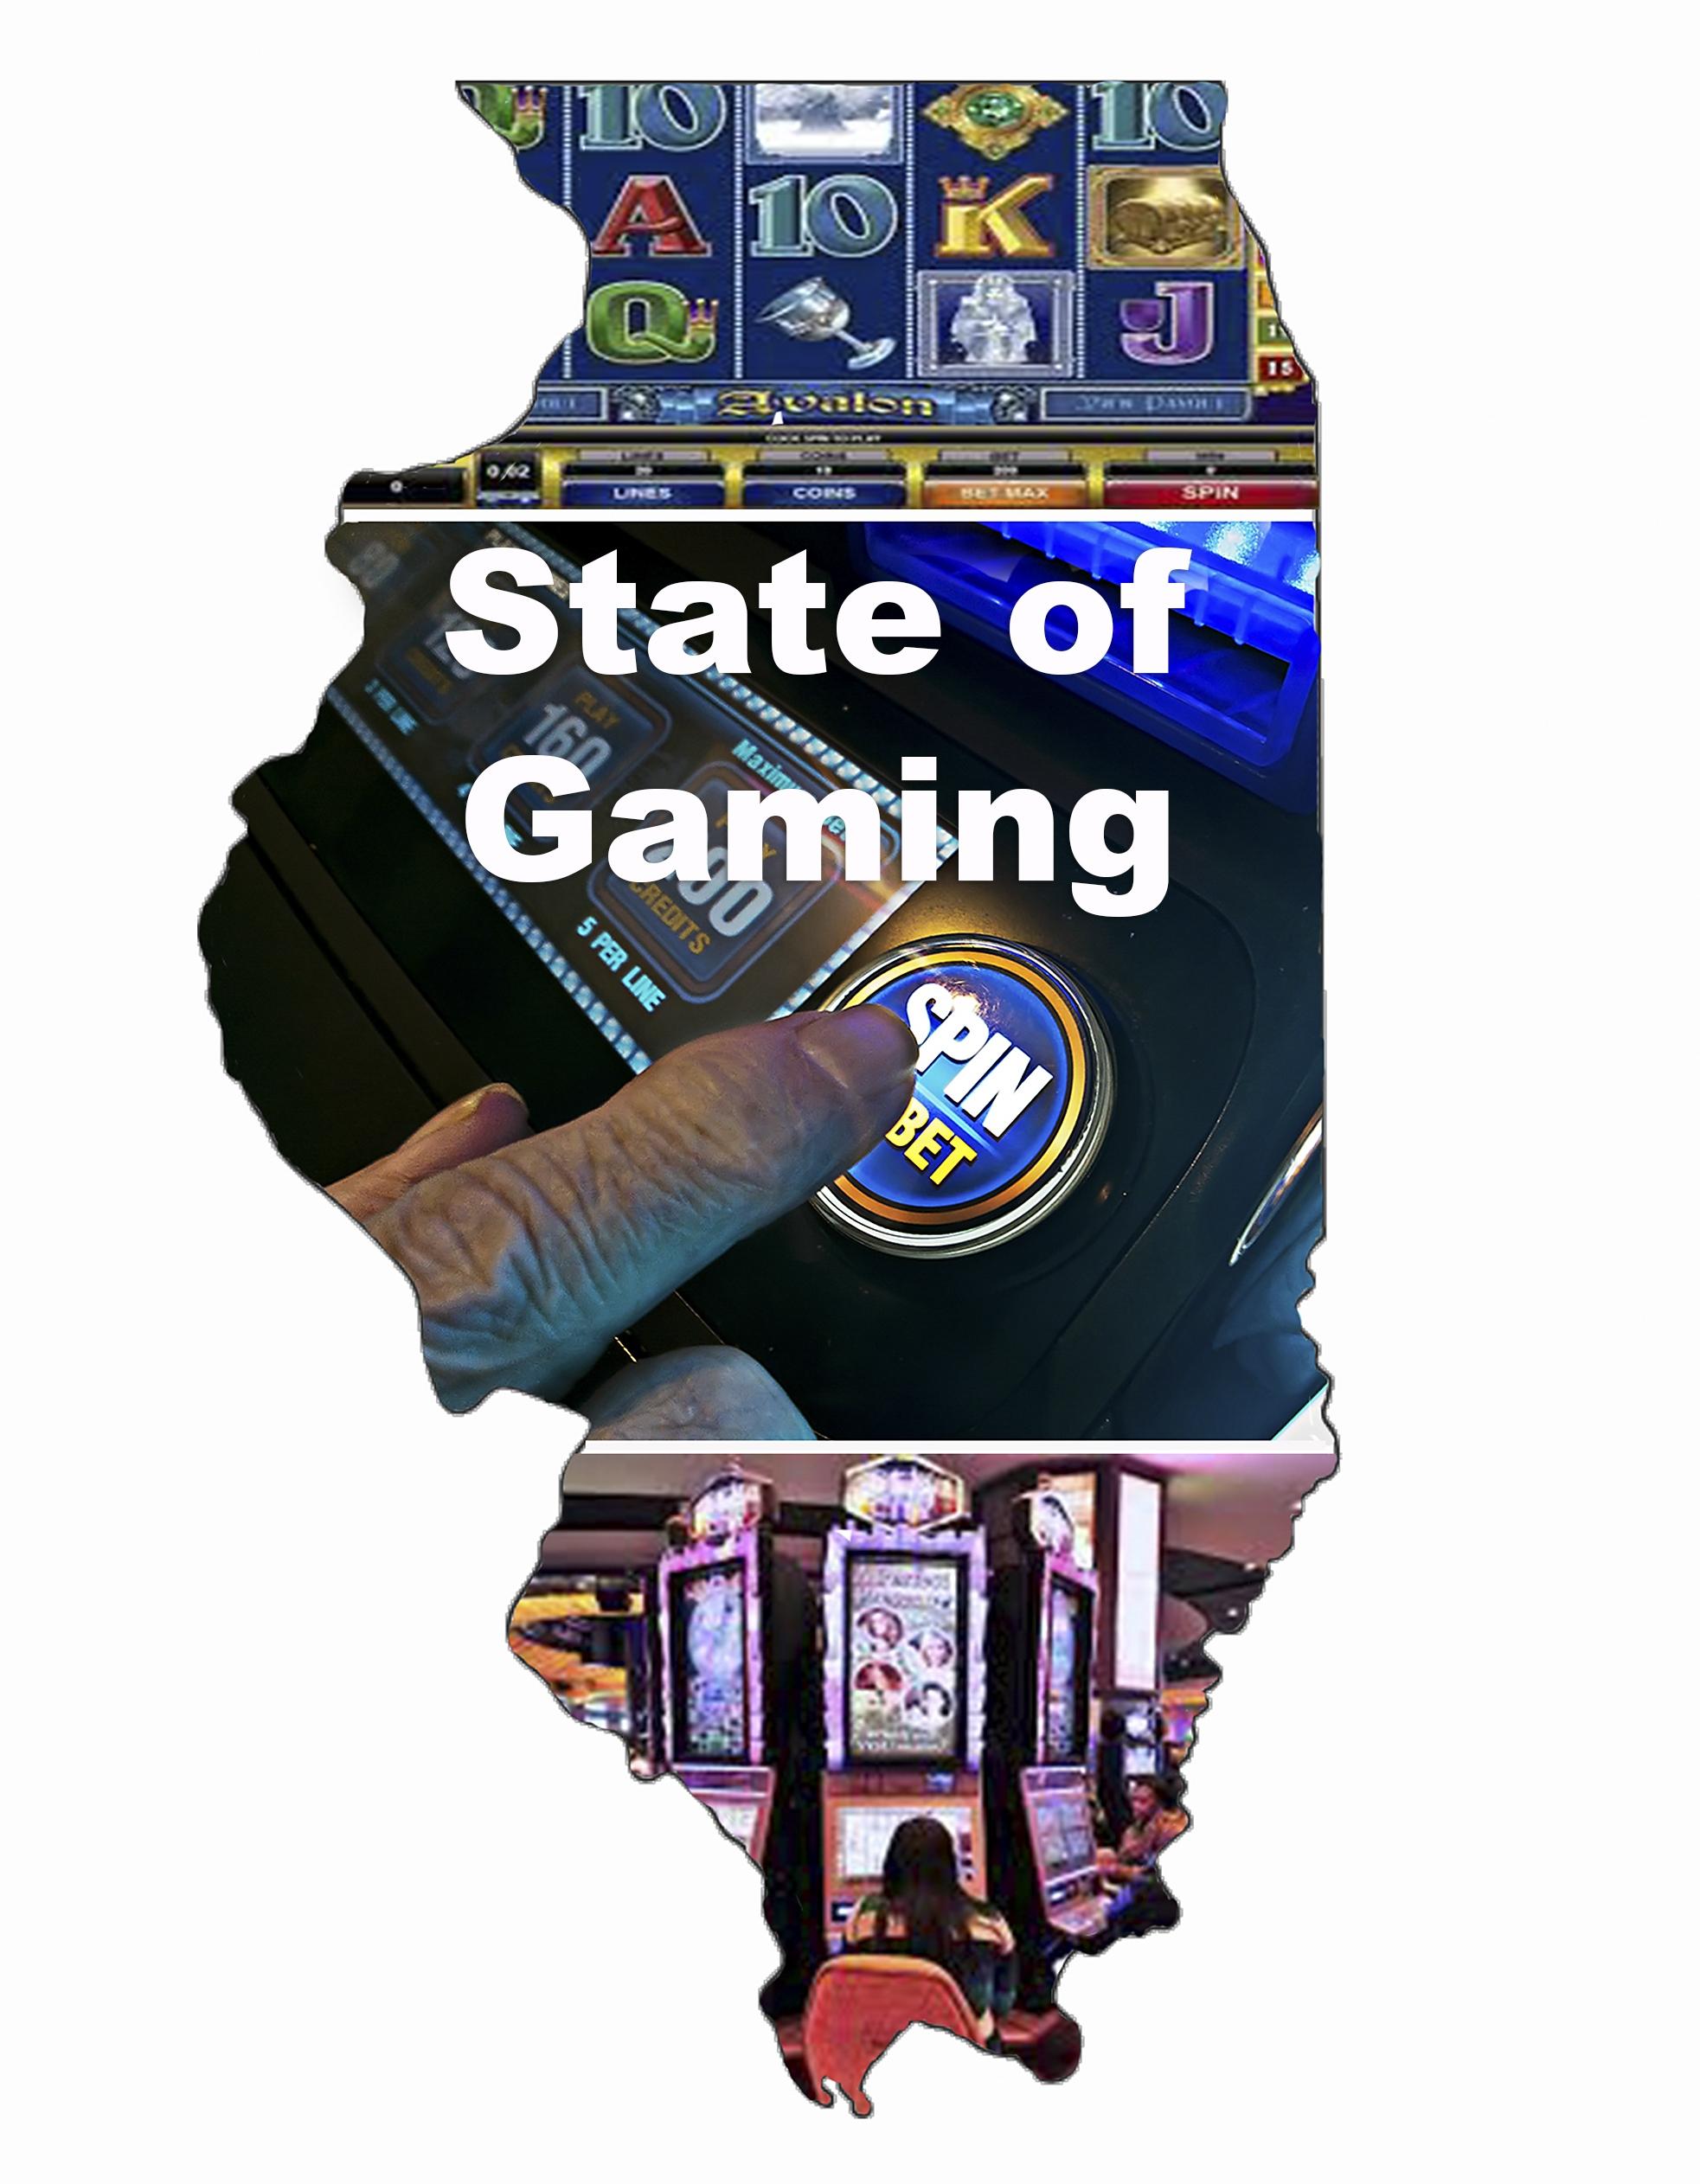 "State of Gaming" outline